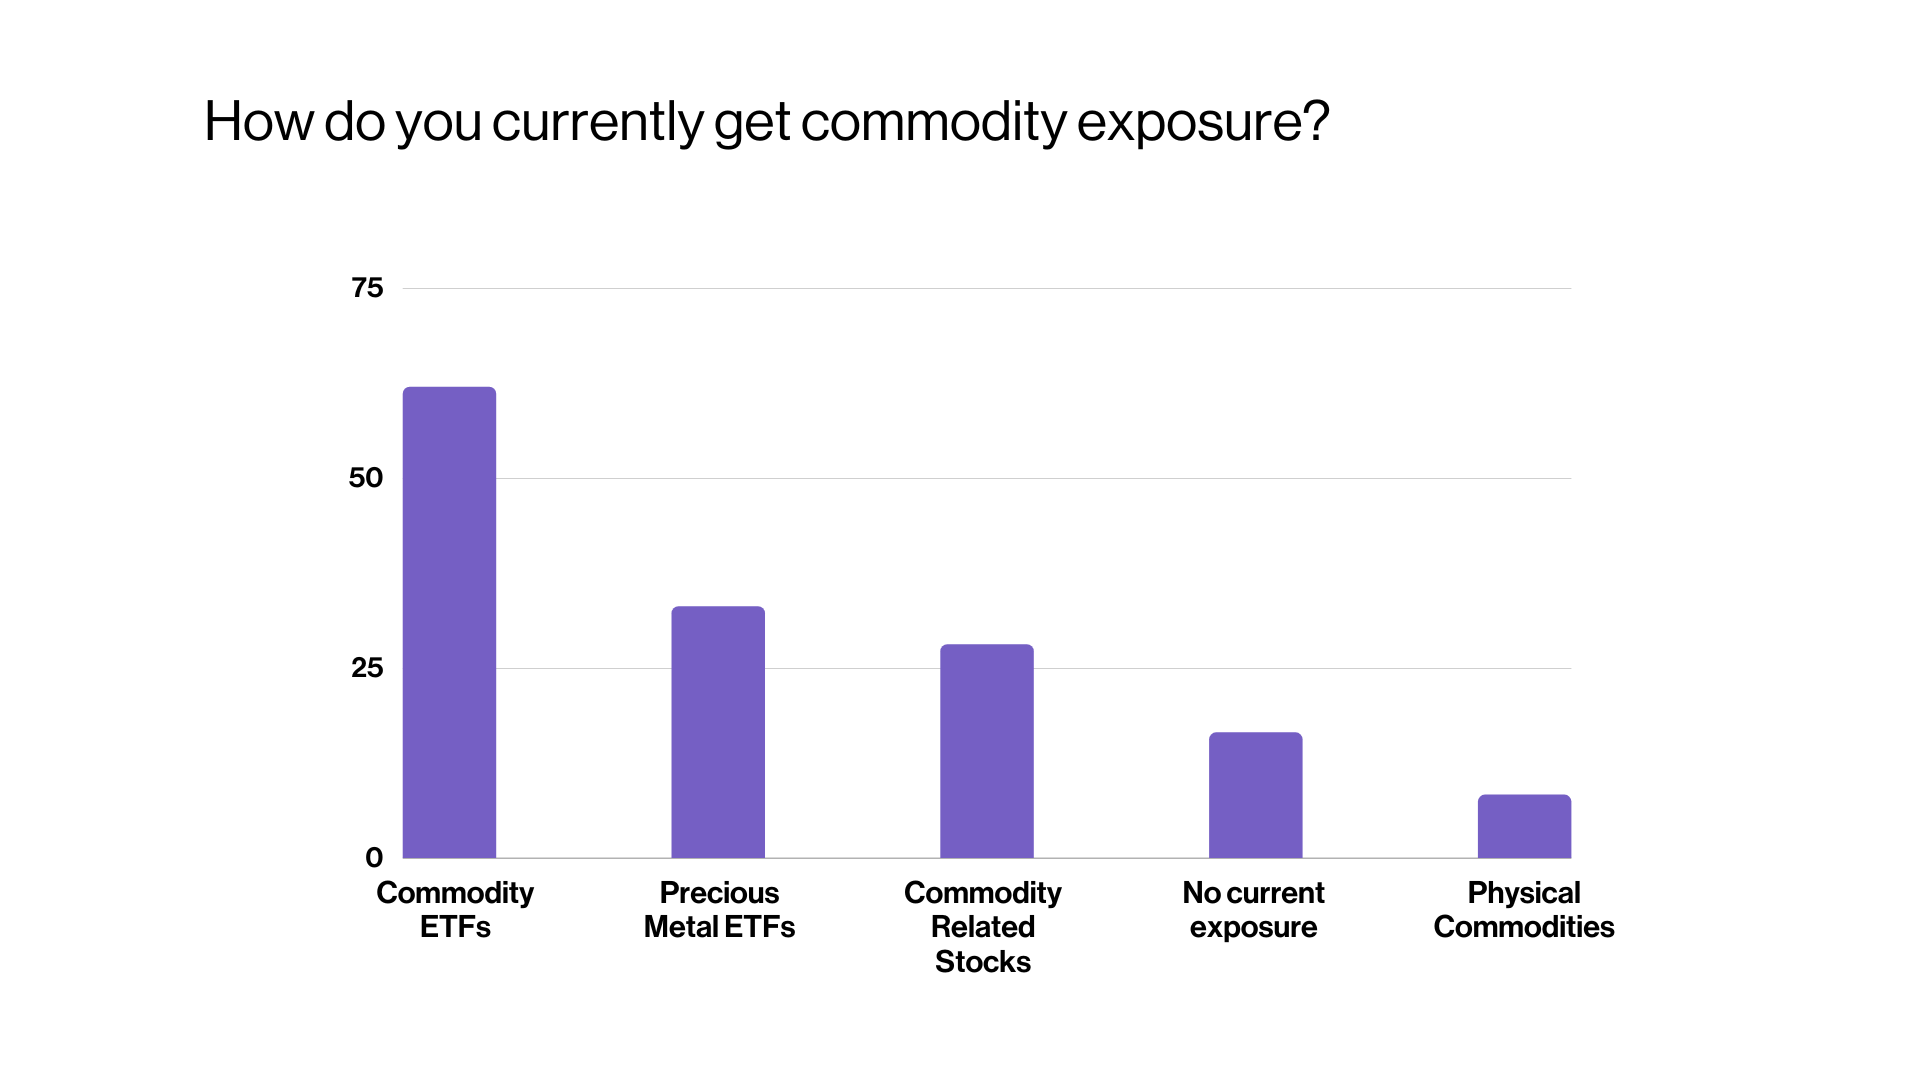 Poll of how advisors currently get commodity exposure, with commodity ETFs in the lead.